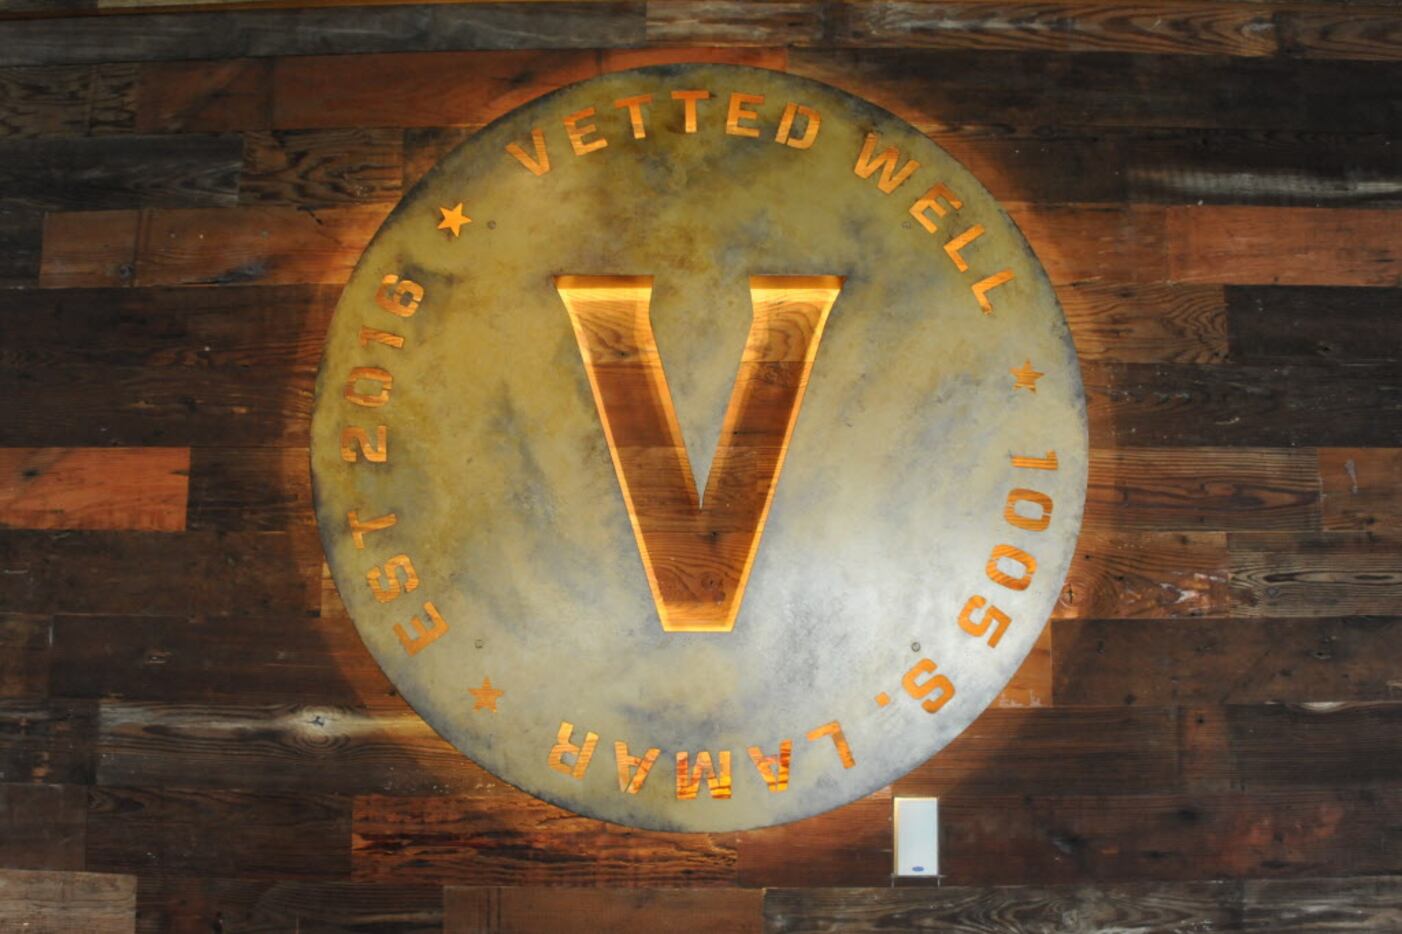 Vetted Well will serve beer and cocktails upstairs from the cinema.